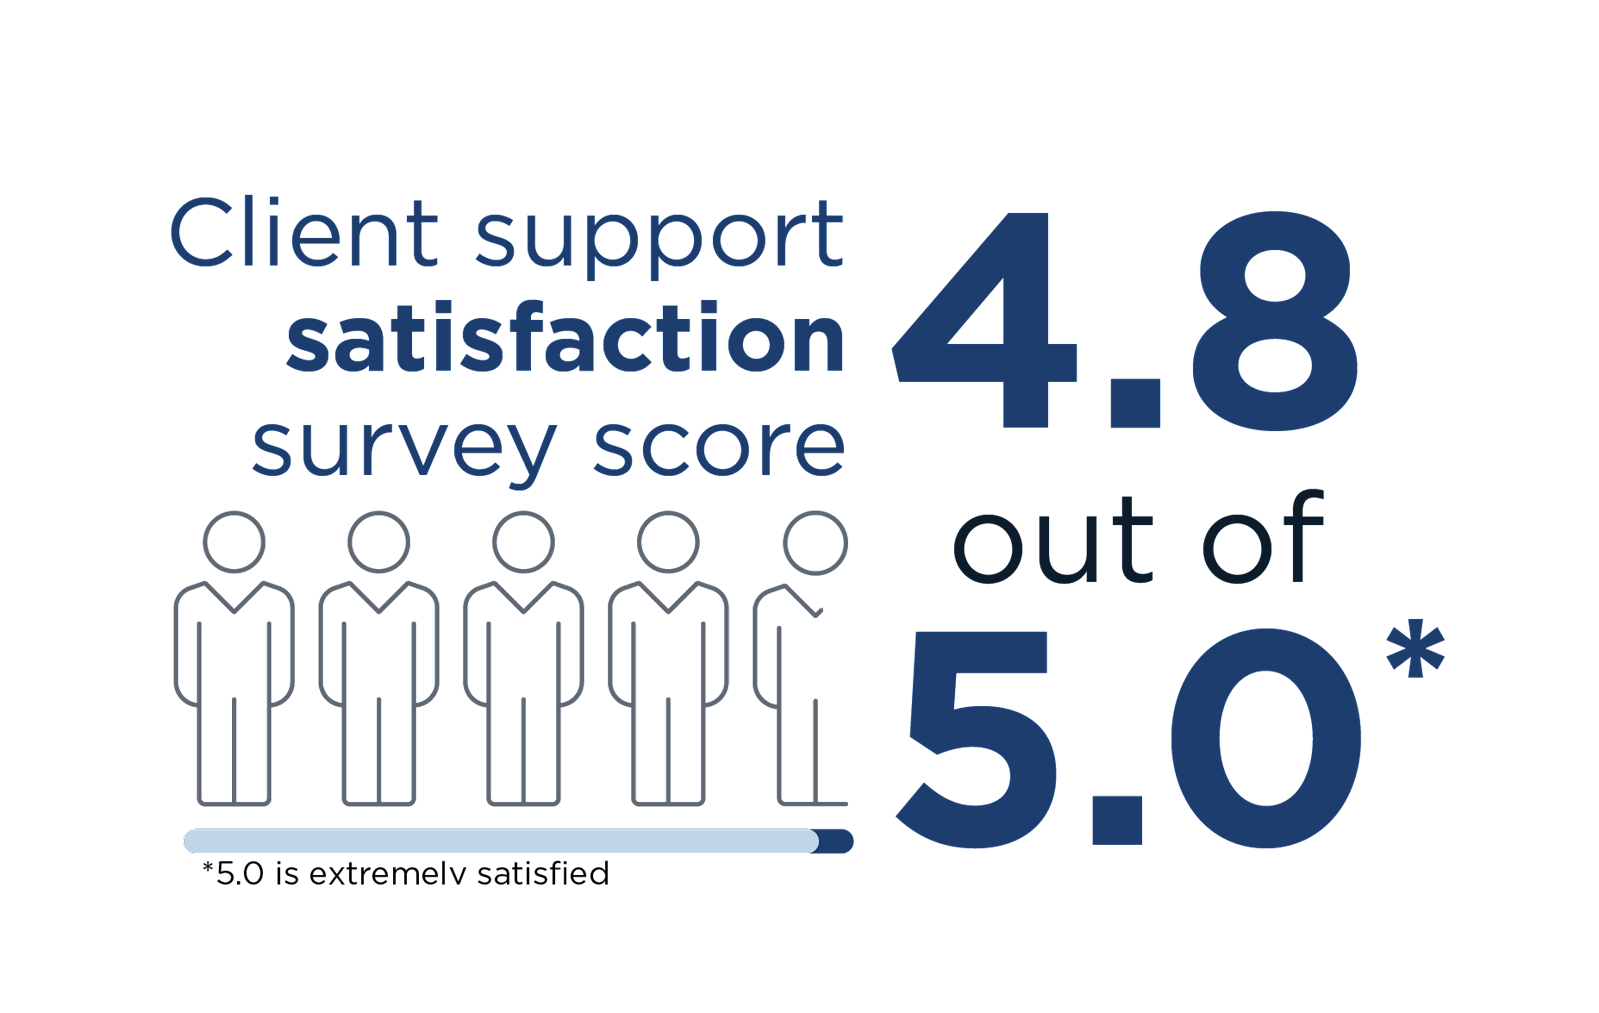 Client support satisfaction survey score 4.8 out of 5.0